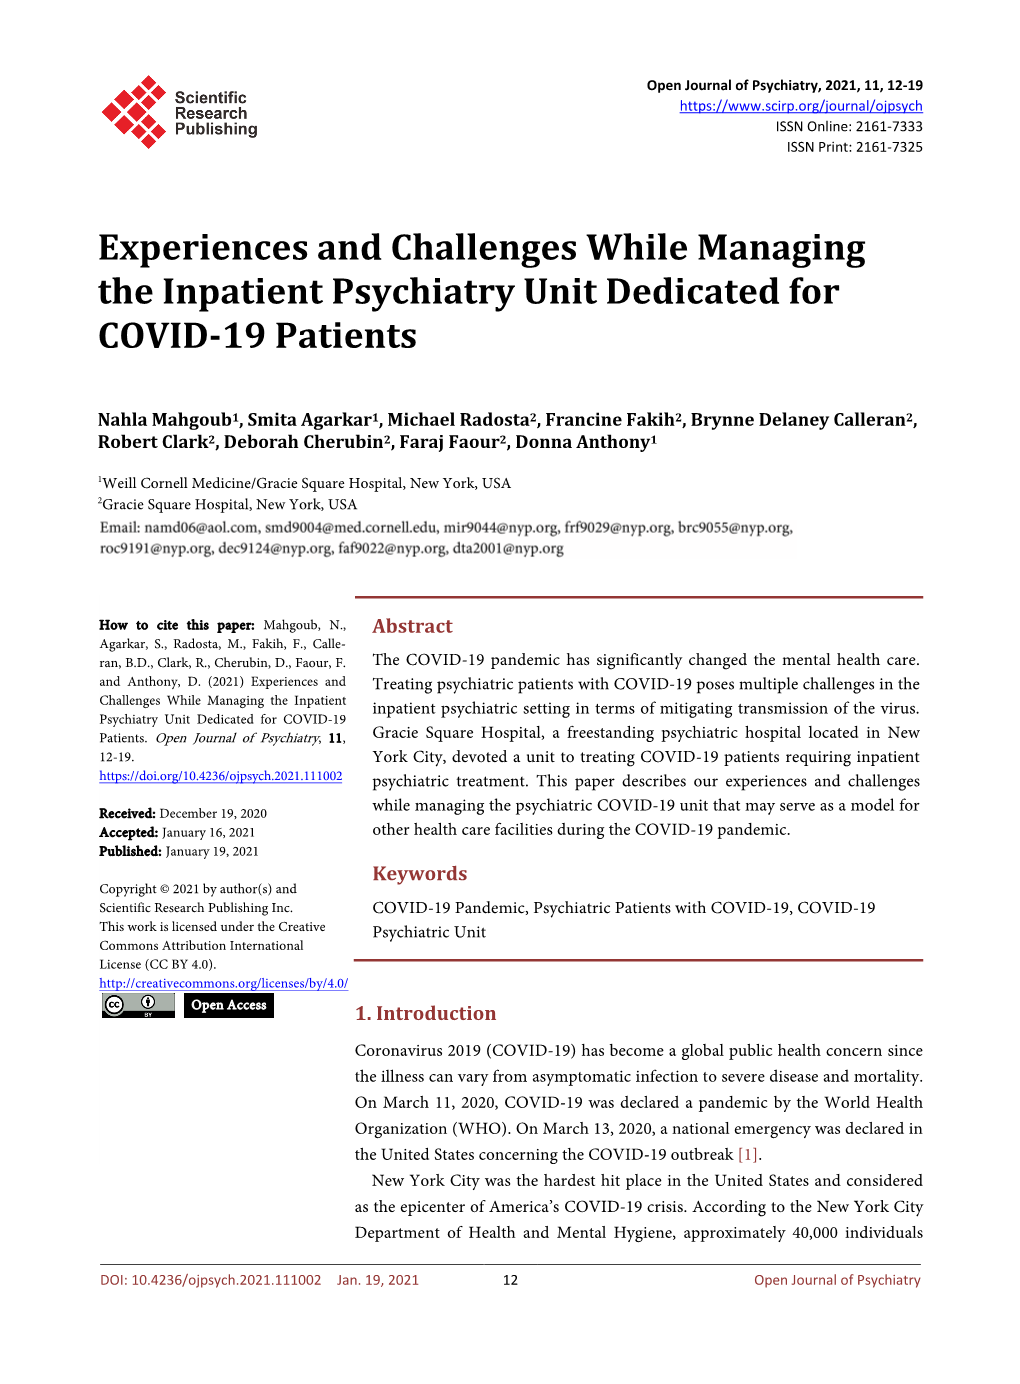 Experiences and Challenges While Managing the Inpatient Psychiatry Unit Dedicated for COVID-19 Patients